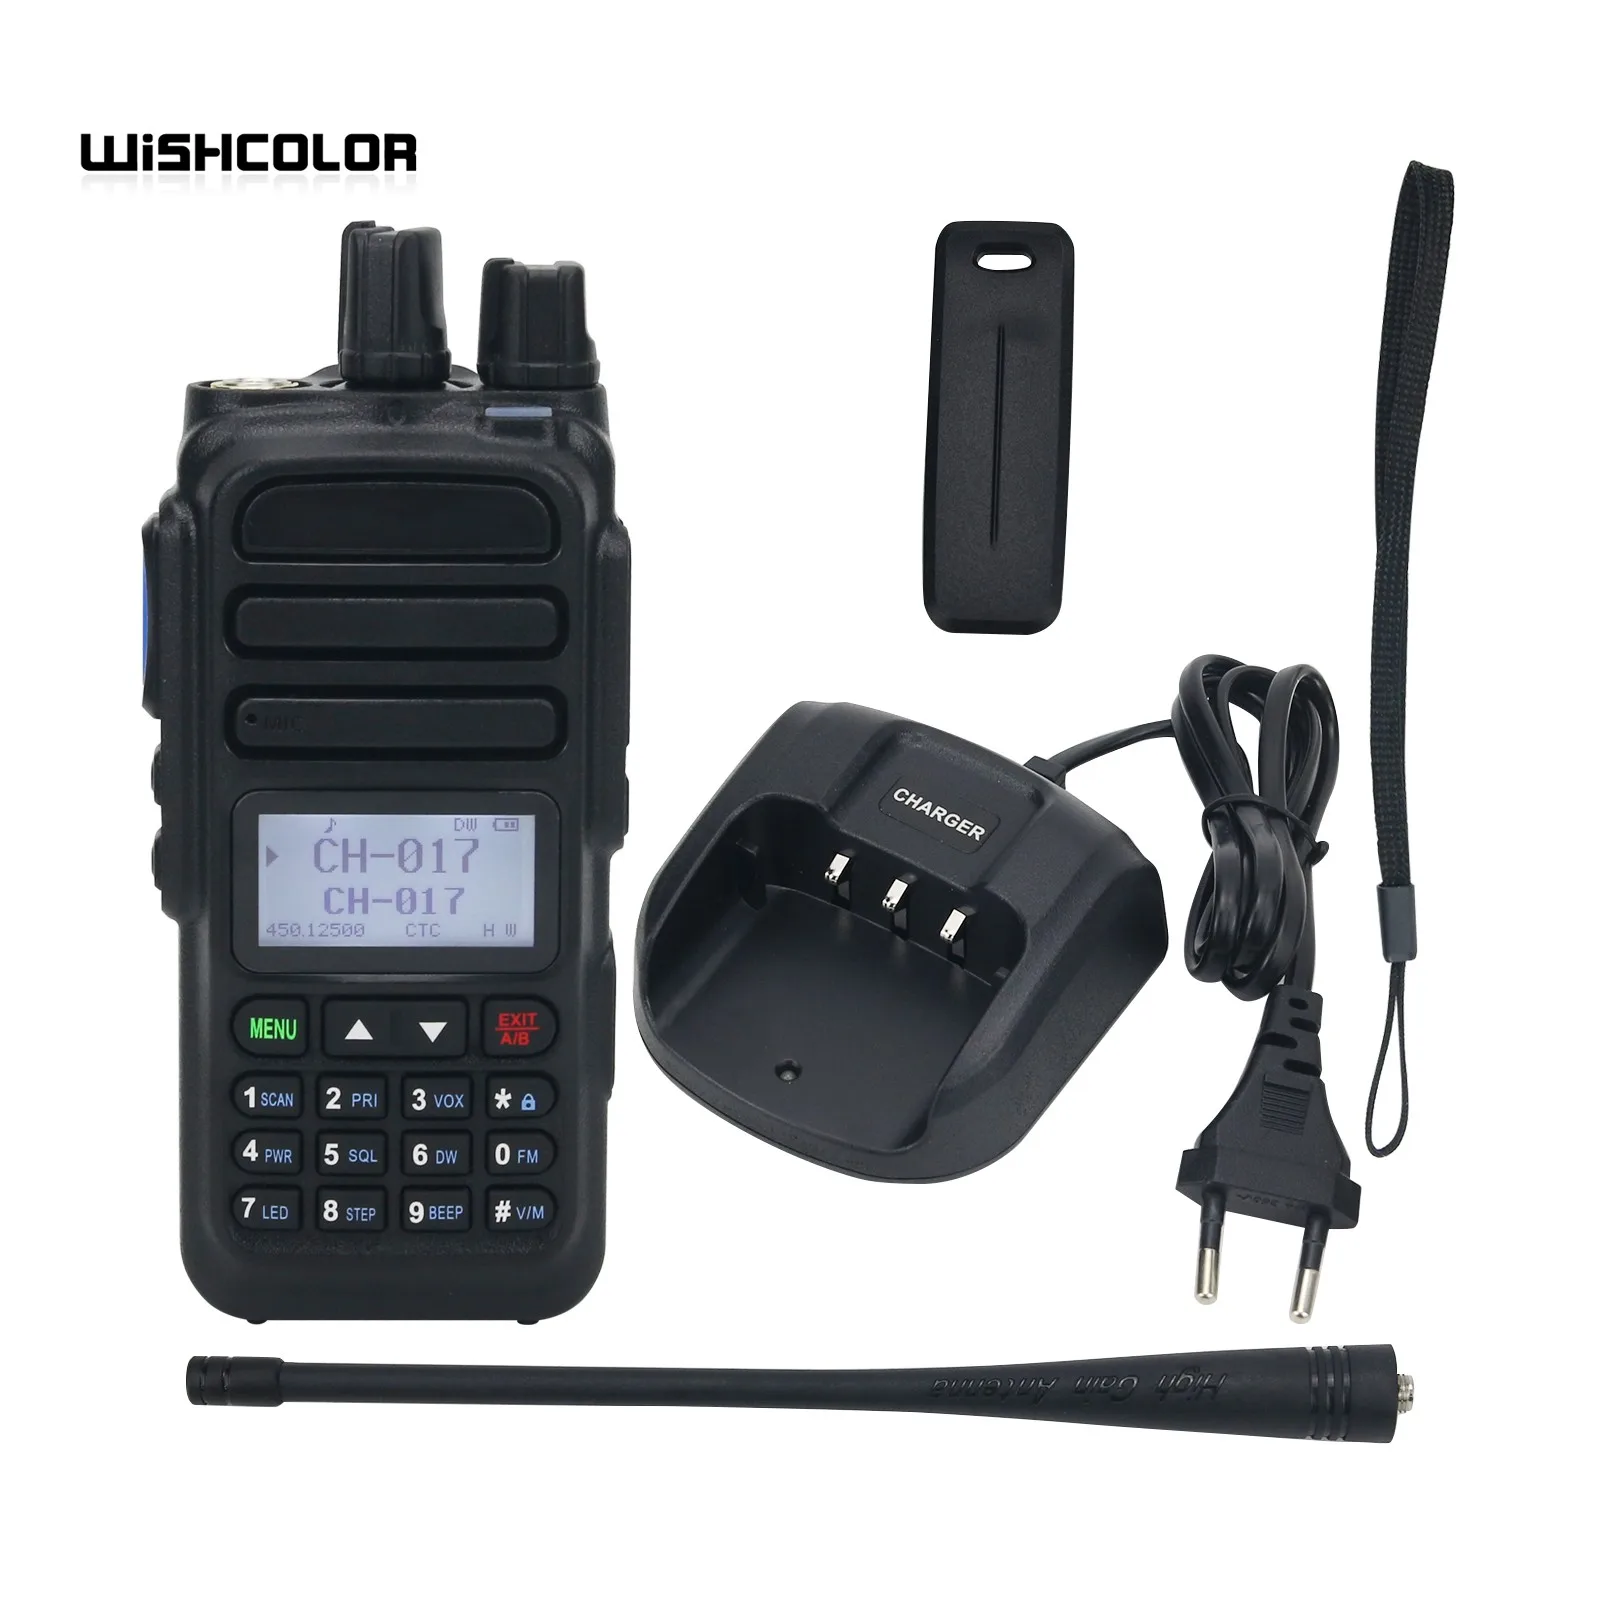 IP68 Waterproof VHF UHF Transceiver 198CH Professional Walkie Talkie Portable Durable Two Way Radio